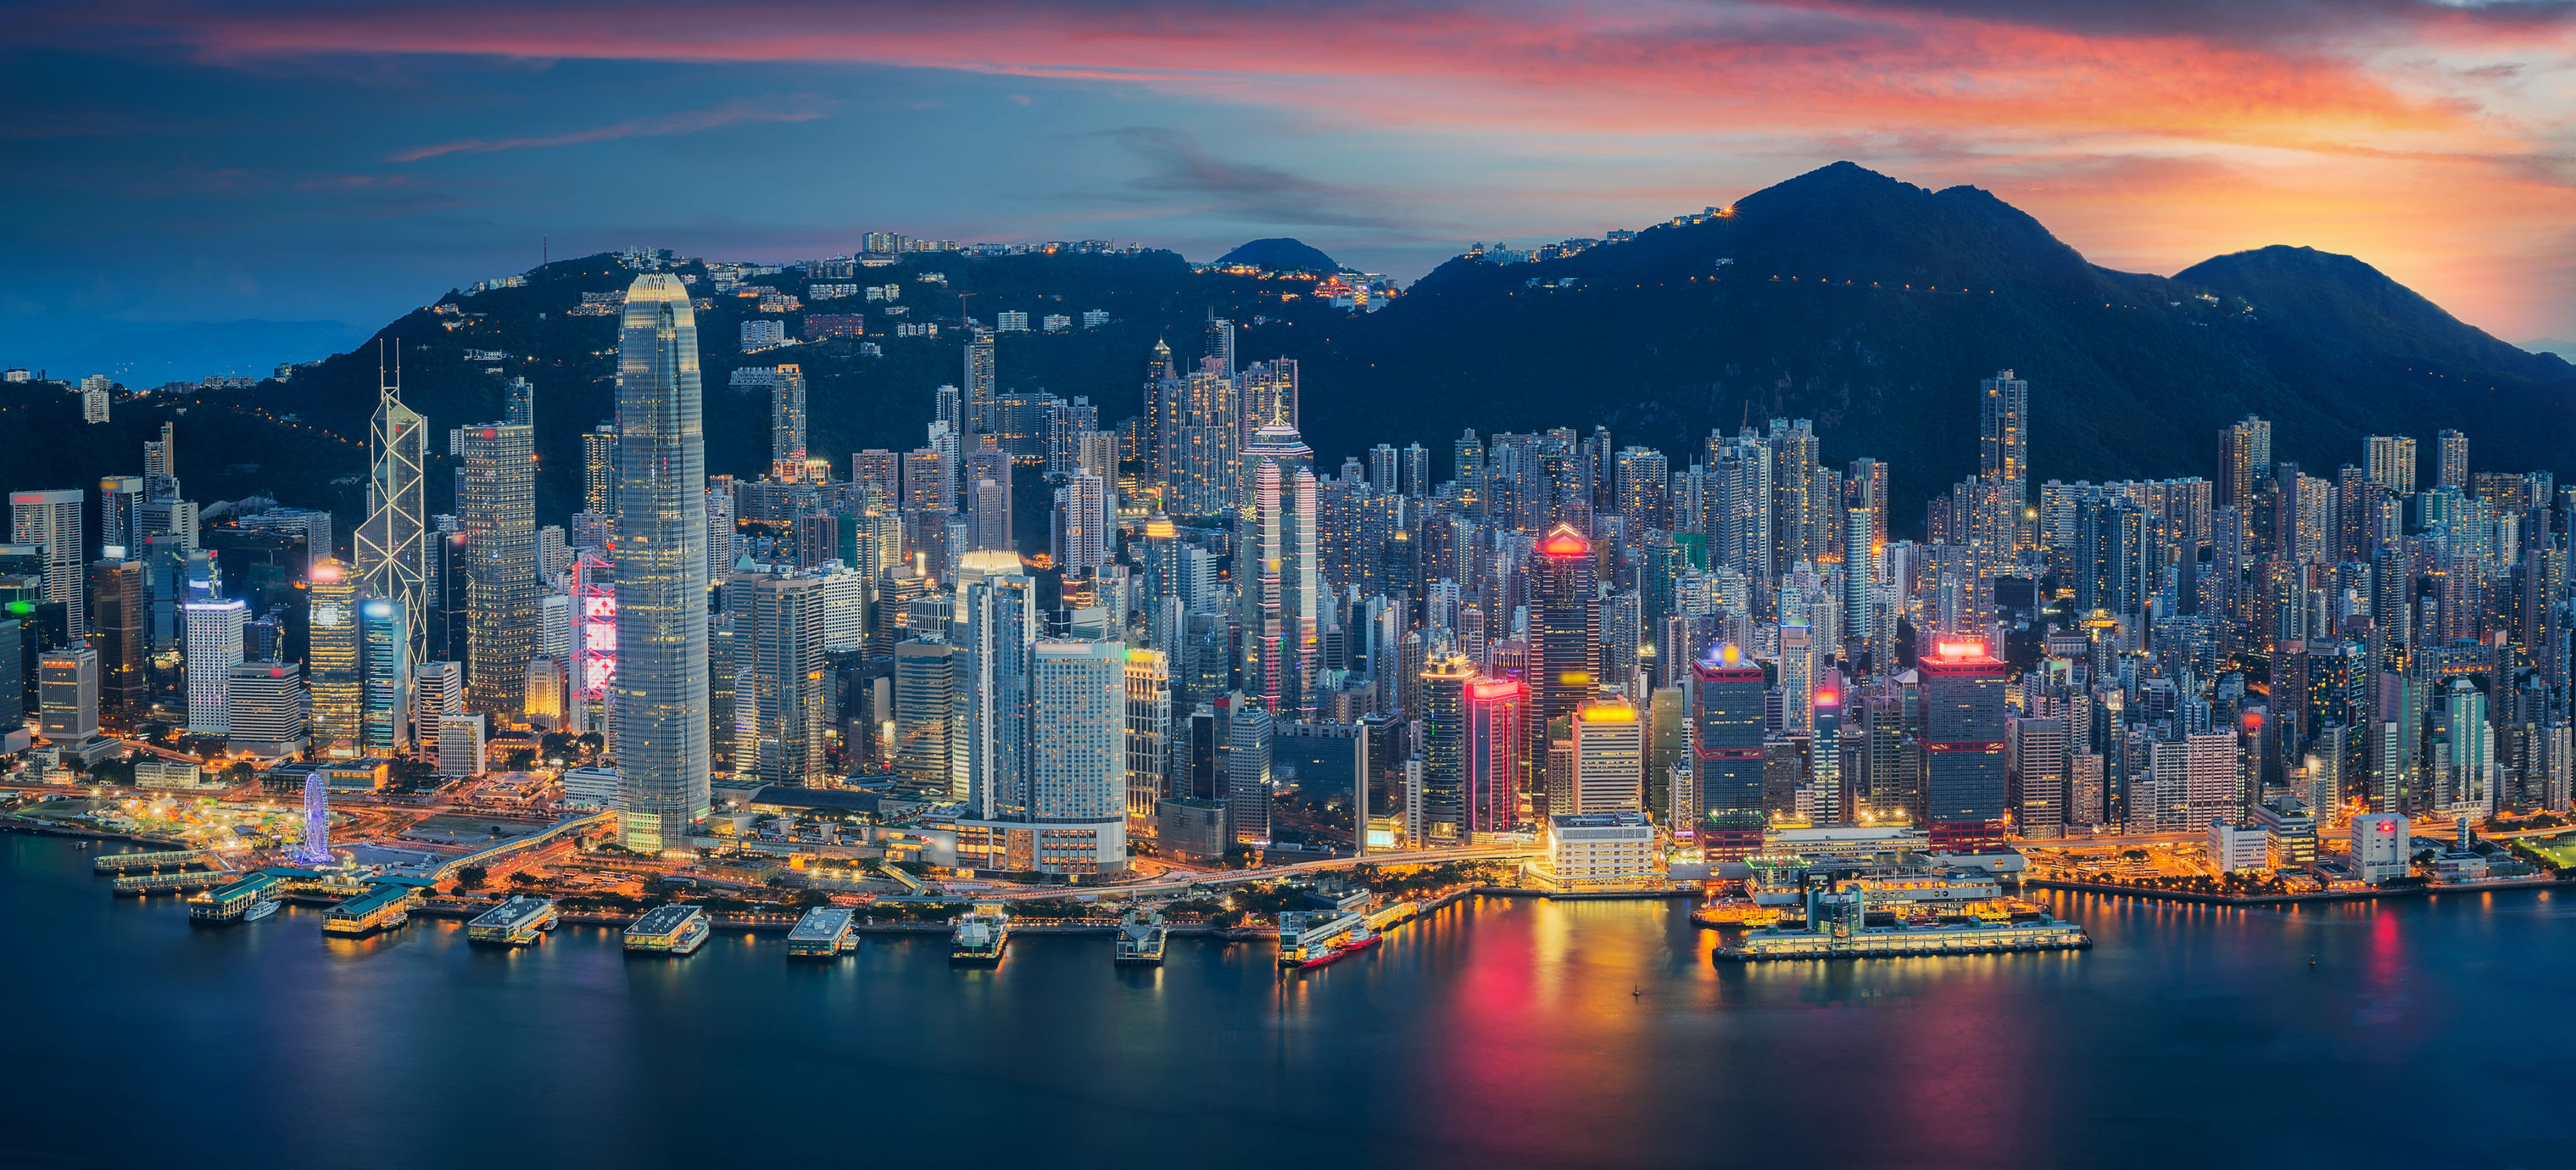 Three Requirements For Winding Up Foreign Company Restated By Hong Kong Court Of Appeal.